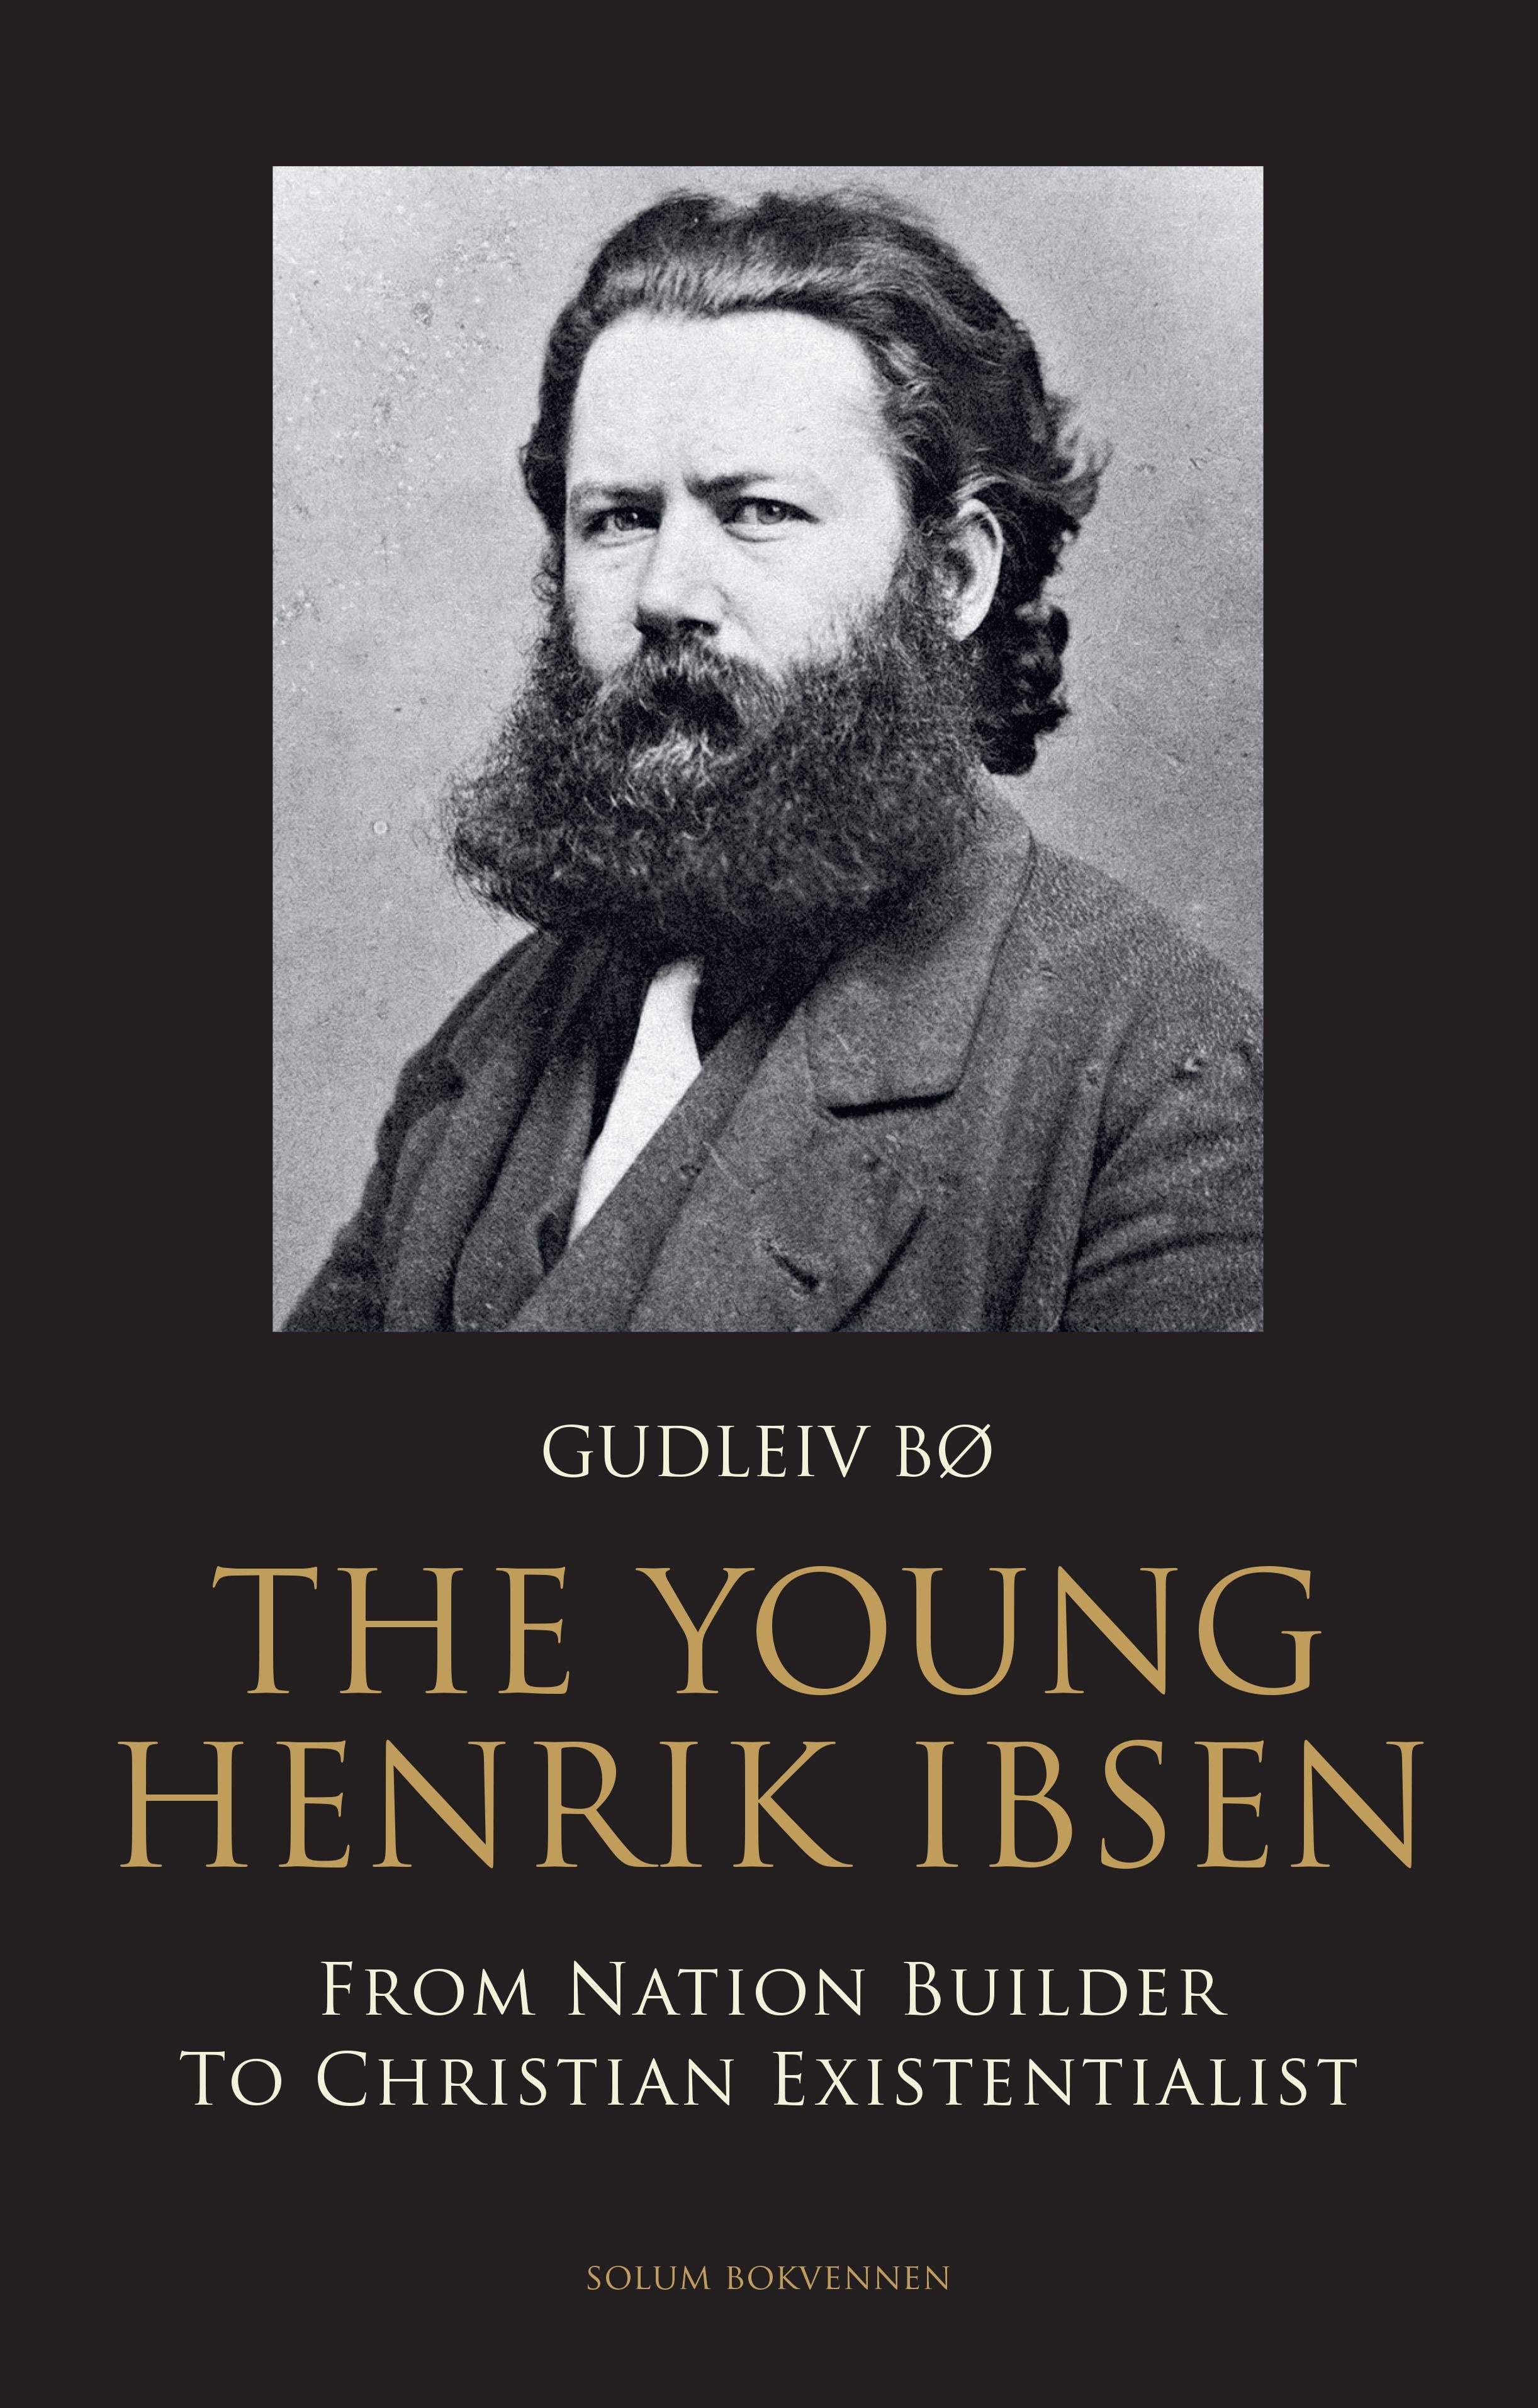 The young Henrik Ibsen: from nation builder to christian existensialist